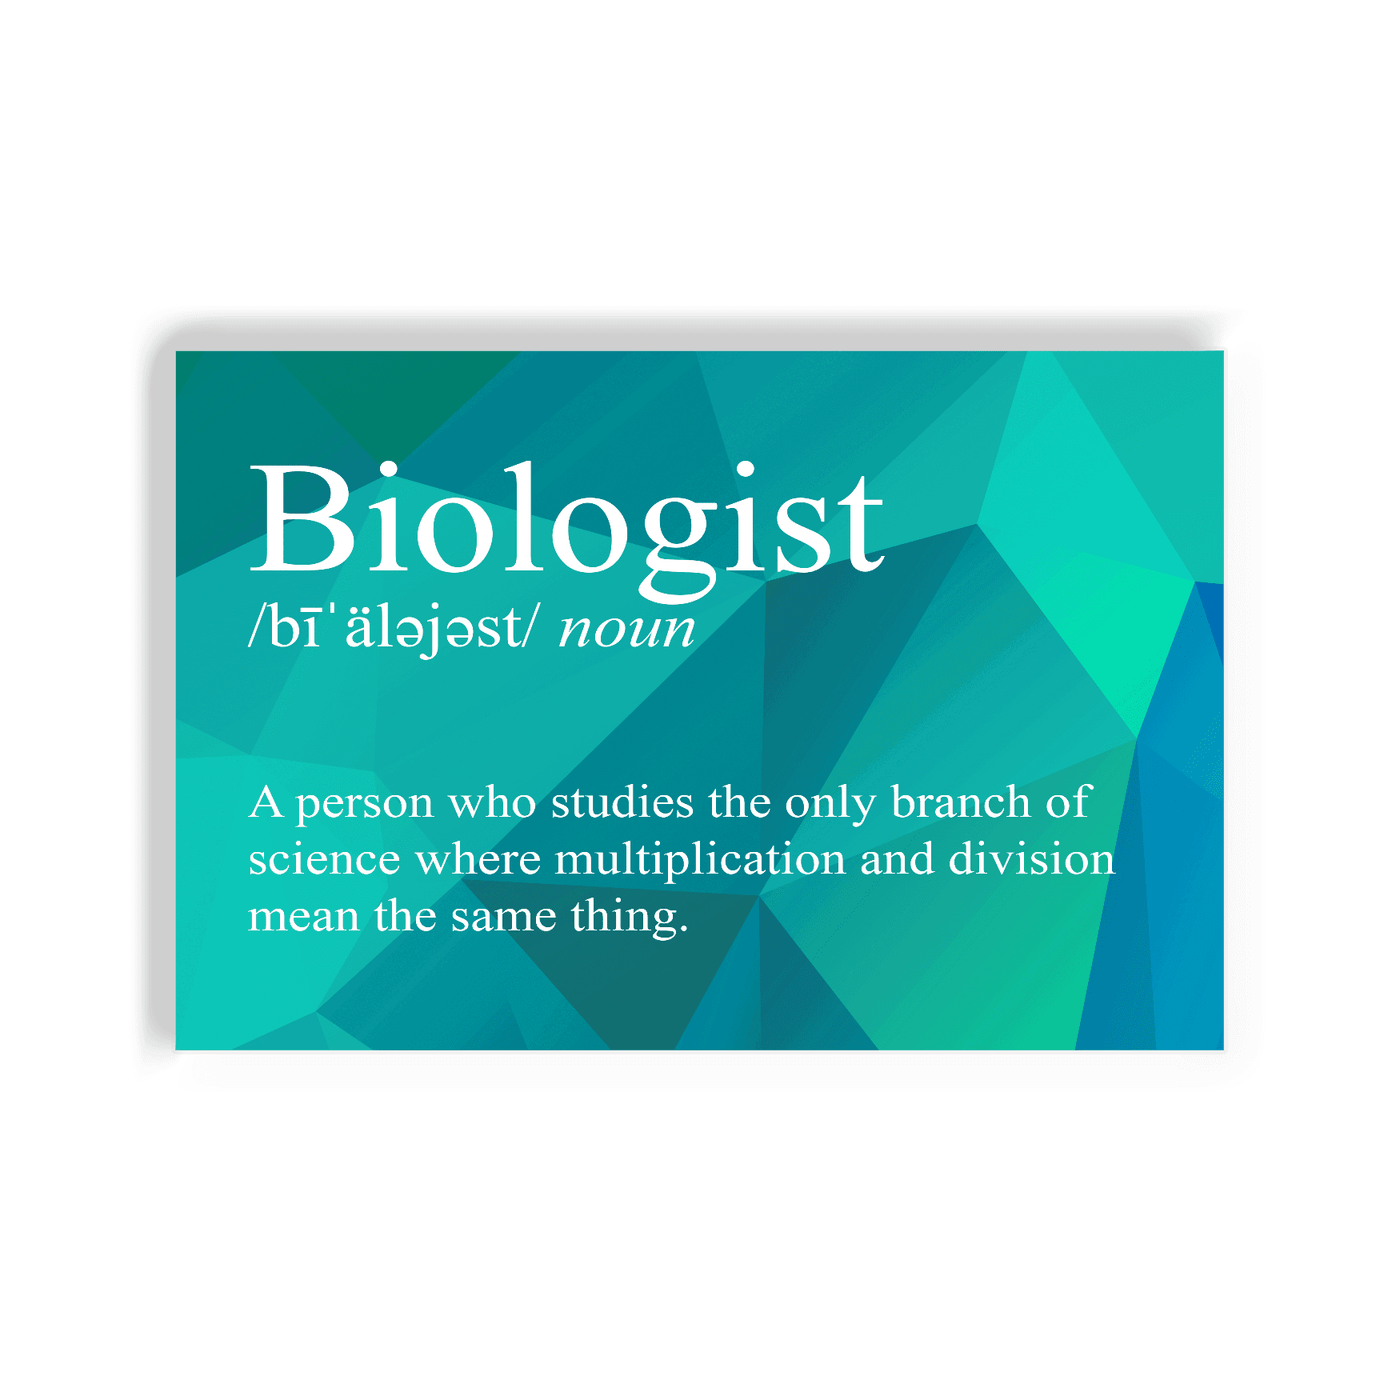 2x3 colorful magnet with image of triangles with text snarkily defining a biologist